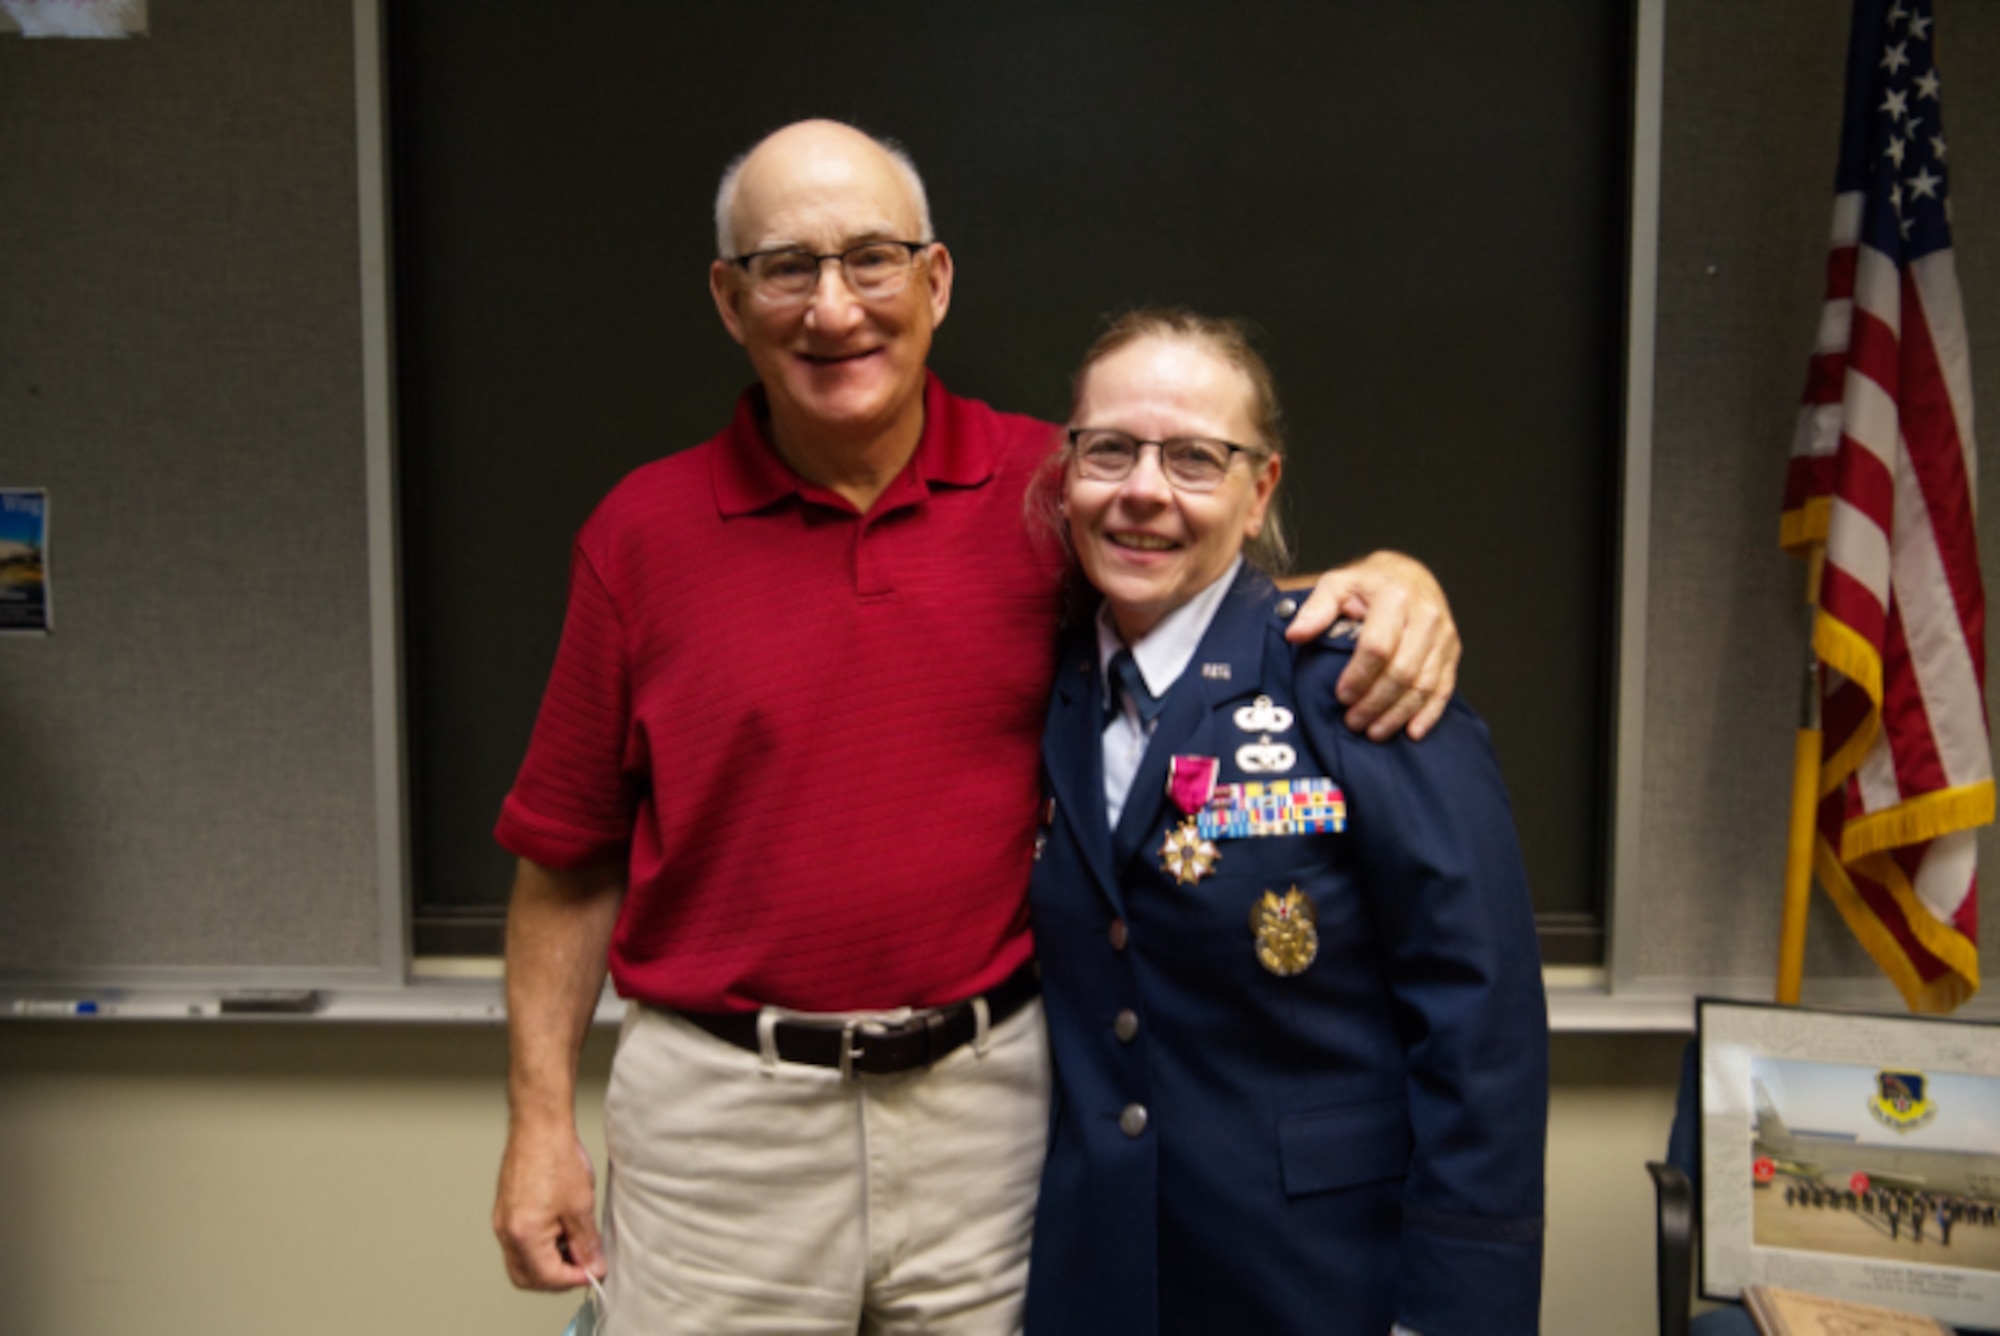 Col. Susan Maki, 434th Air Refueling Wing inspector general, poses for a photo with her husband Bob at Grissom Air Reserve Base, Ind., Sept. 12, 2020. Maki retired after 32 years of service in the Minnesota Air Guard and Air Force Reserve. (U.S. Air Force Photo / A1C Harrison Withrow)